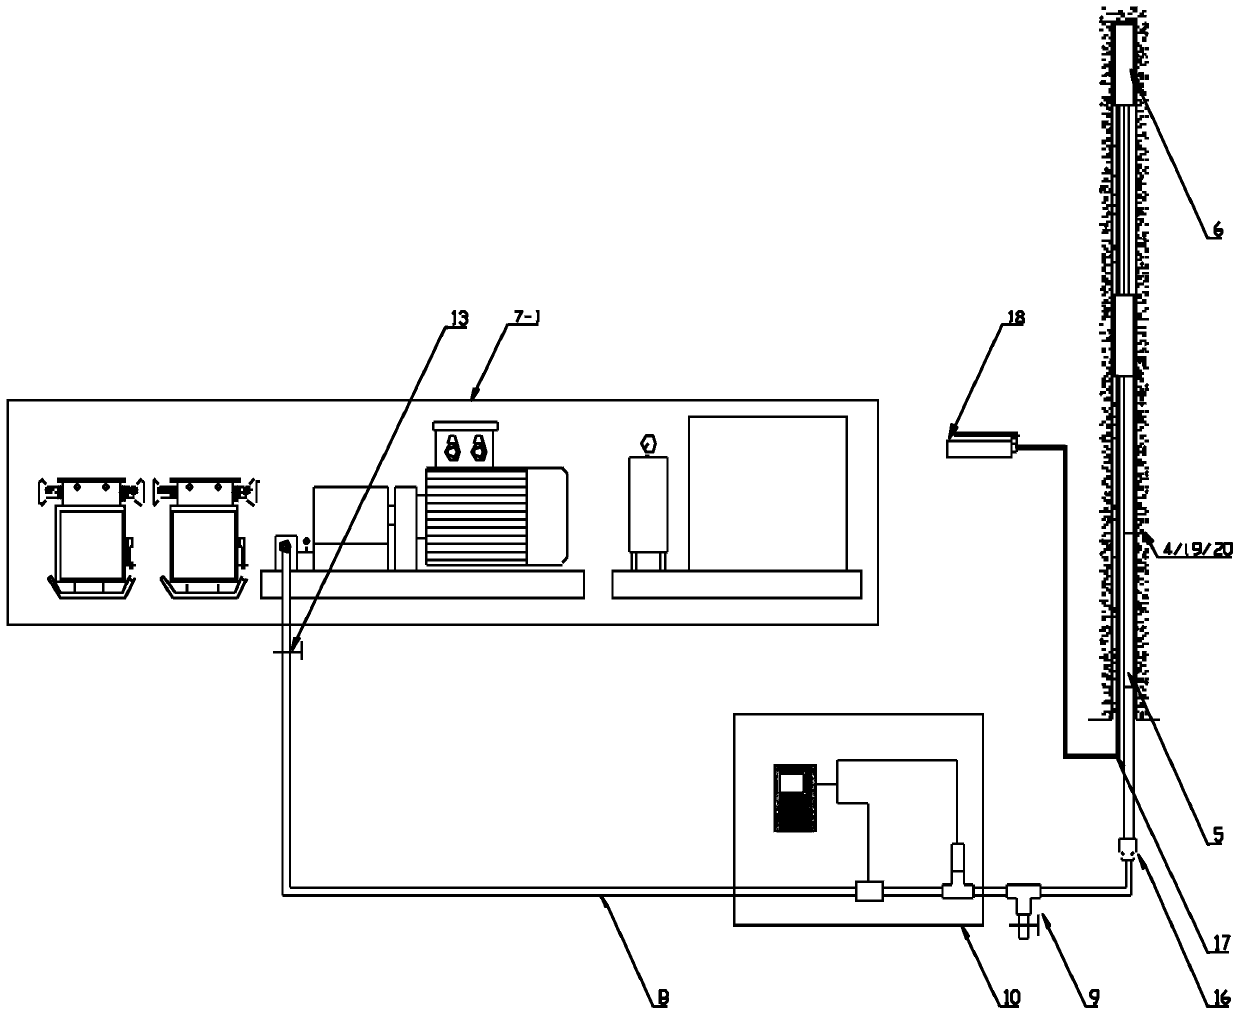 A method and equipment for controlling the cavitation of top coal by pulse hydraulic fracturing